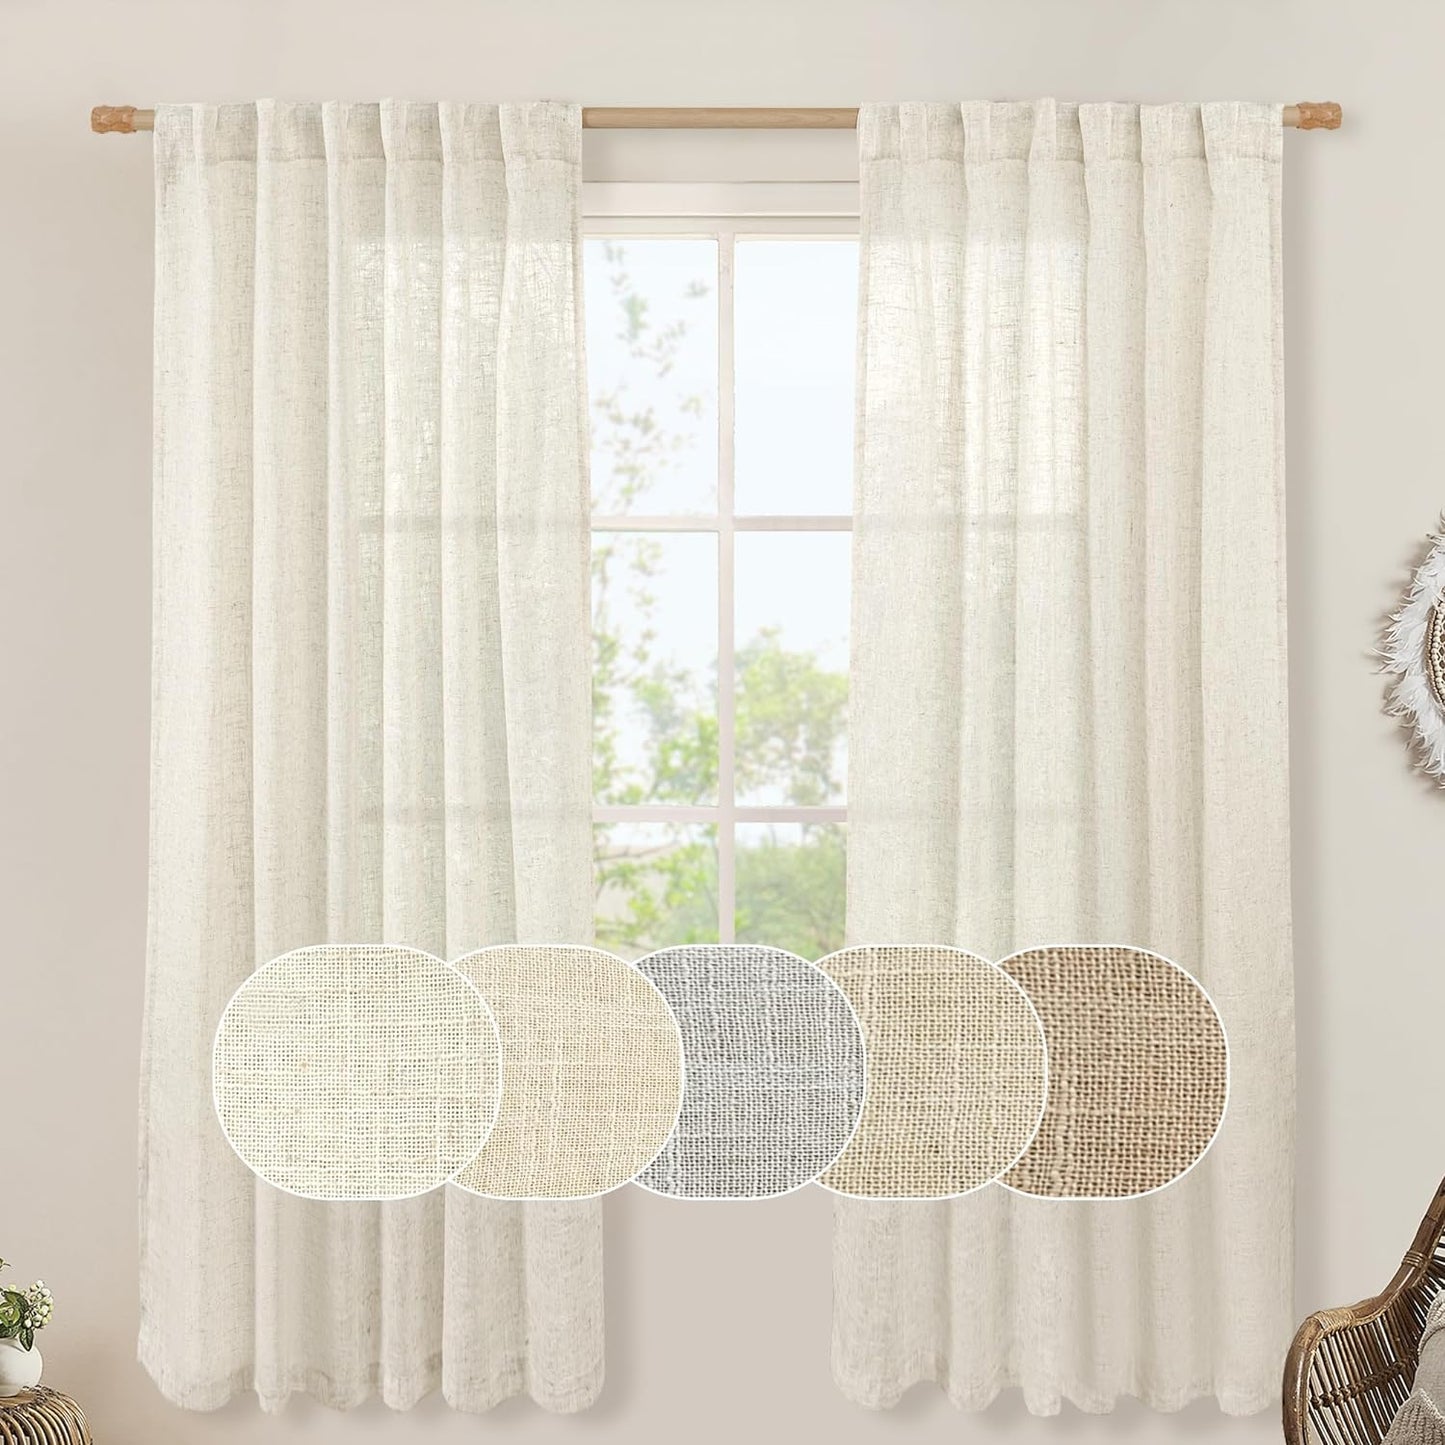 LAMIT Natural Linen Blended Curtains for Living Room, Back Tab and Rod Pocket Semi Sheer Curtains Light Filtering Country Rustic Drapes for Bedroom/Farmhouse, 2 Panels,52 X 108 Inch, Linen  LAMIT Natural 52W X 72L 